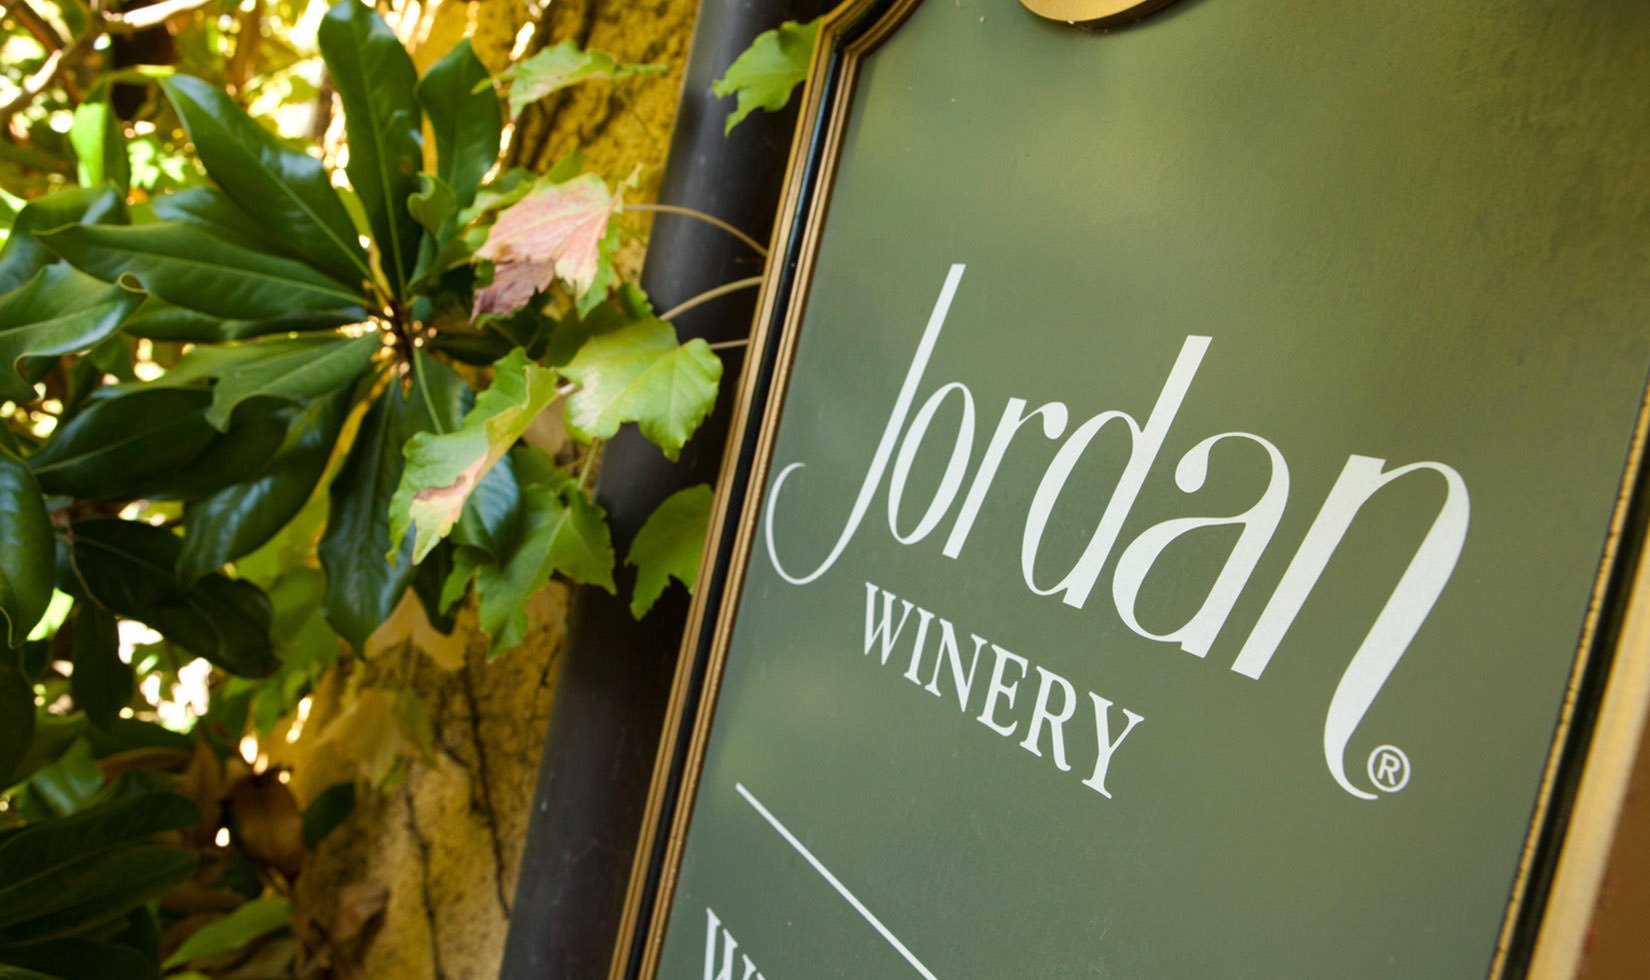 close up of a sign that says Jordan Winery